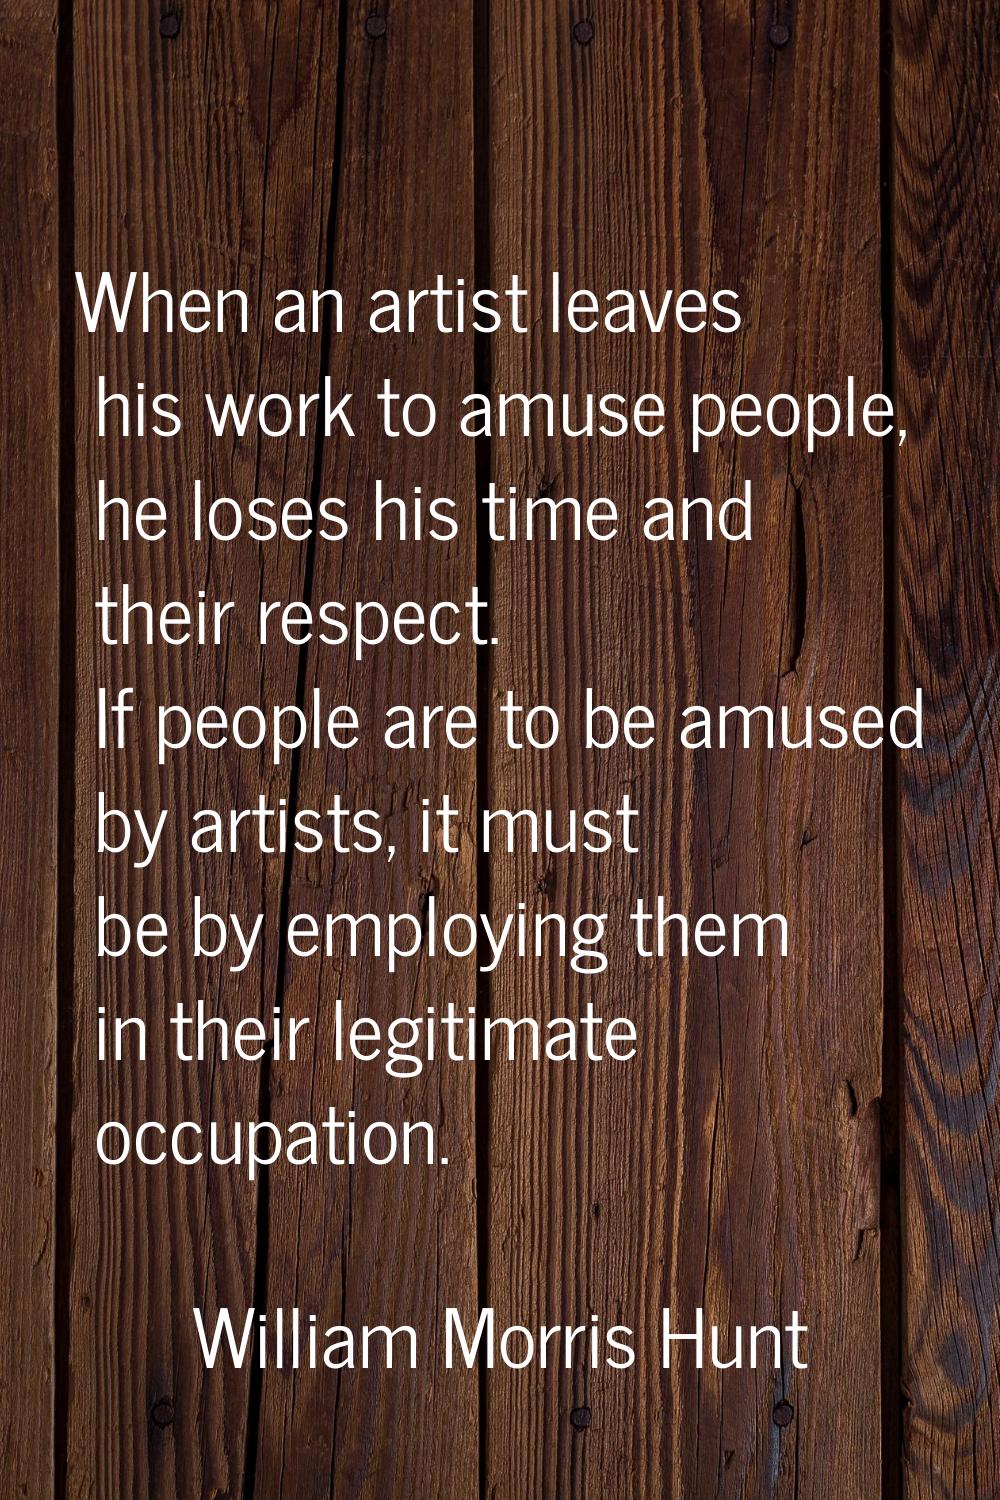 When an artist leaves his work to amuse people, he loses his time and their respect. If people are 